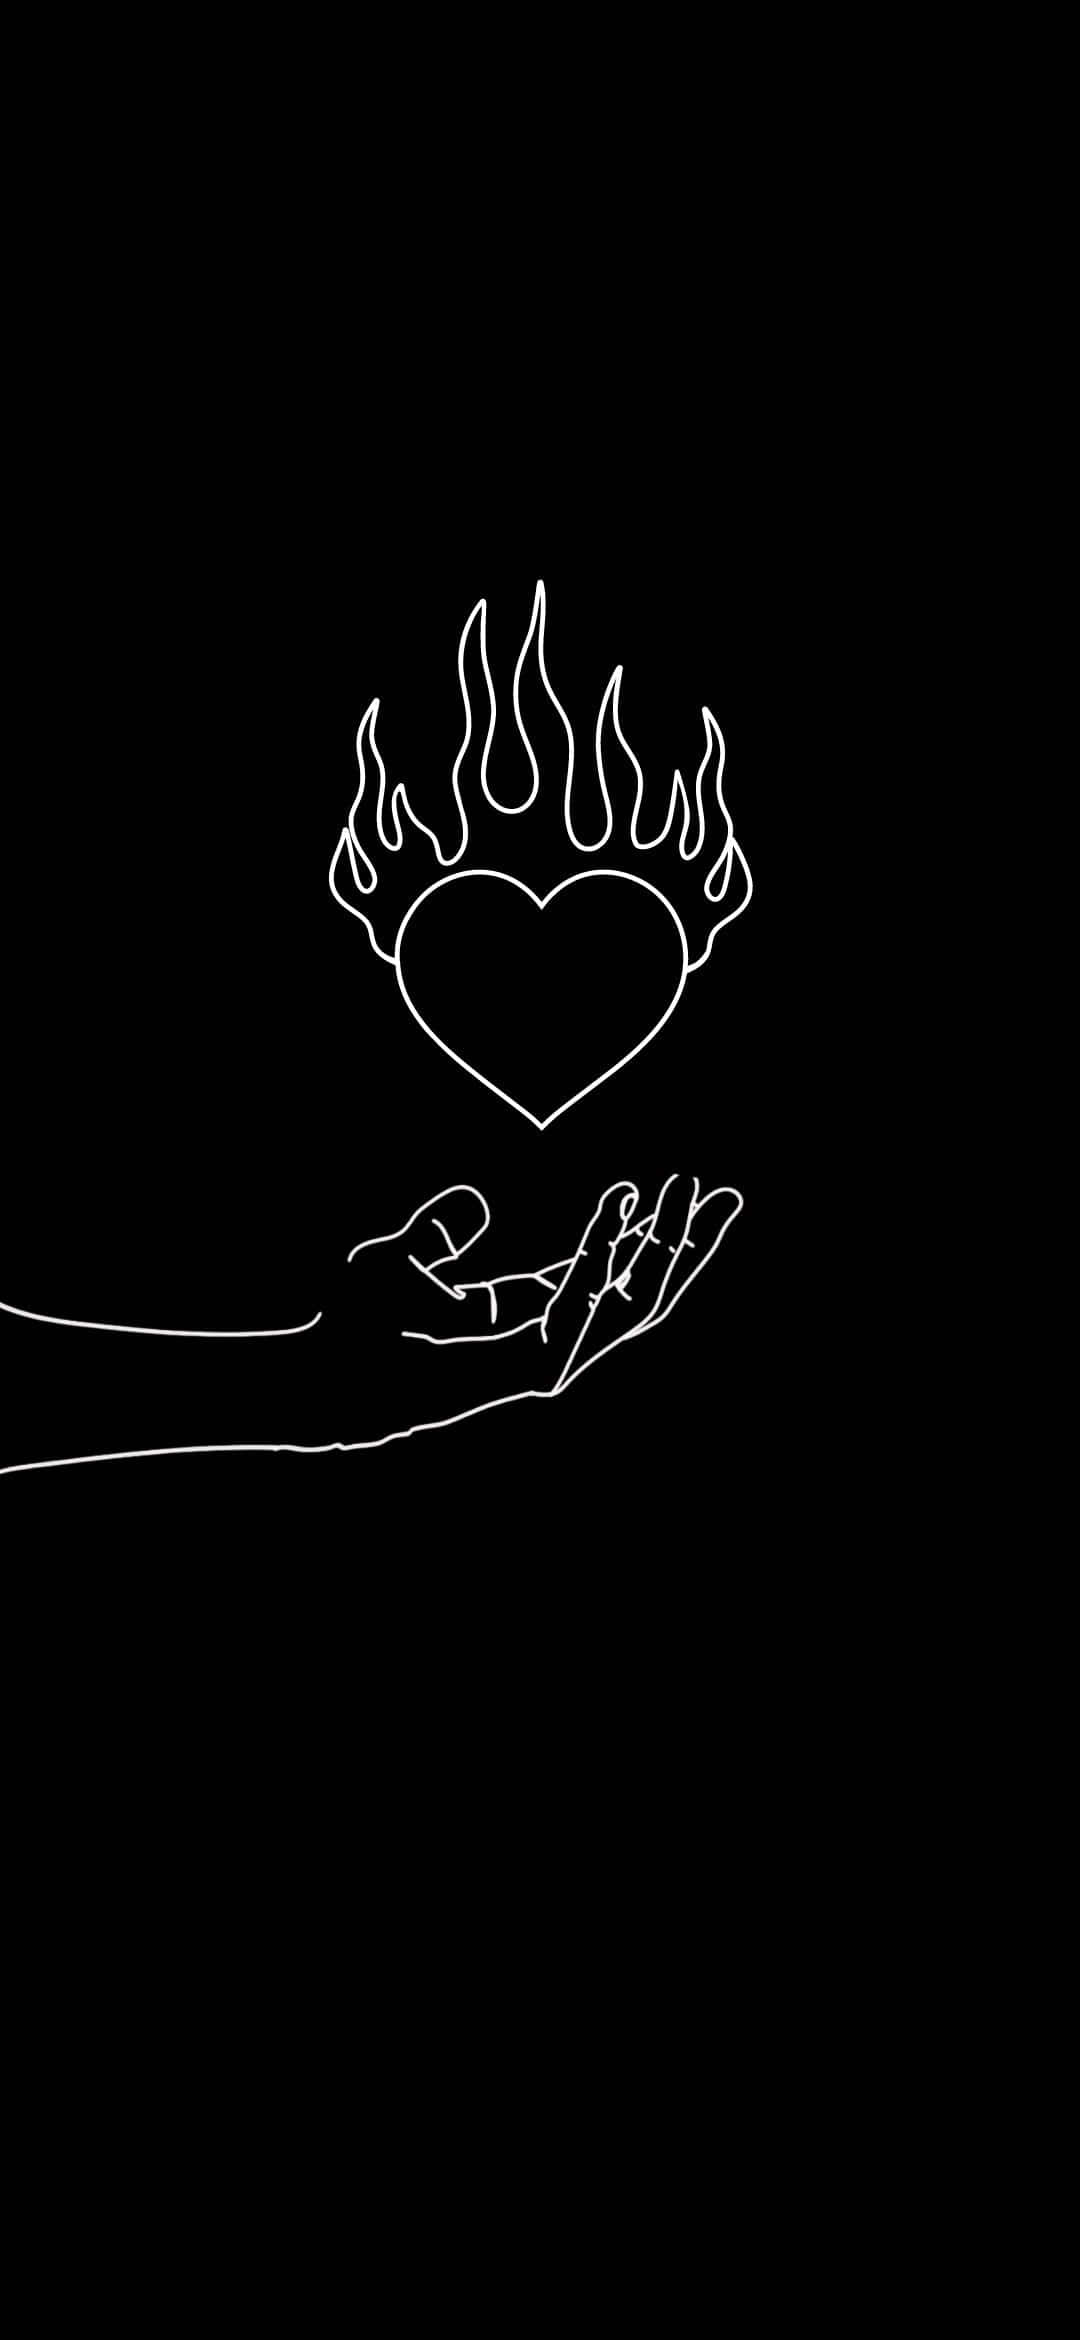 A Hand Holding A Heart With Flames On It